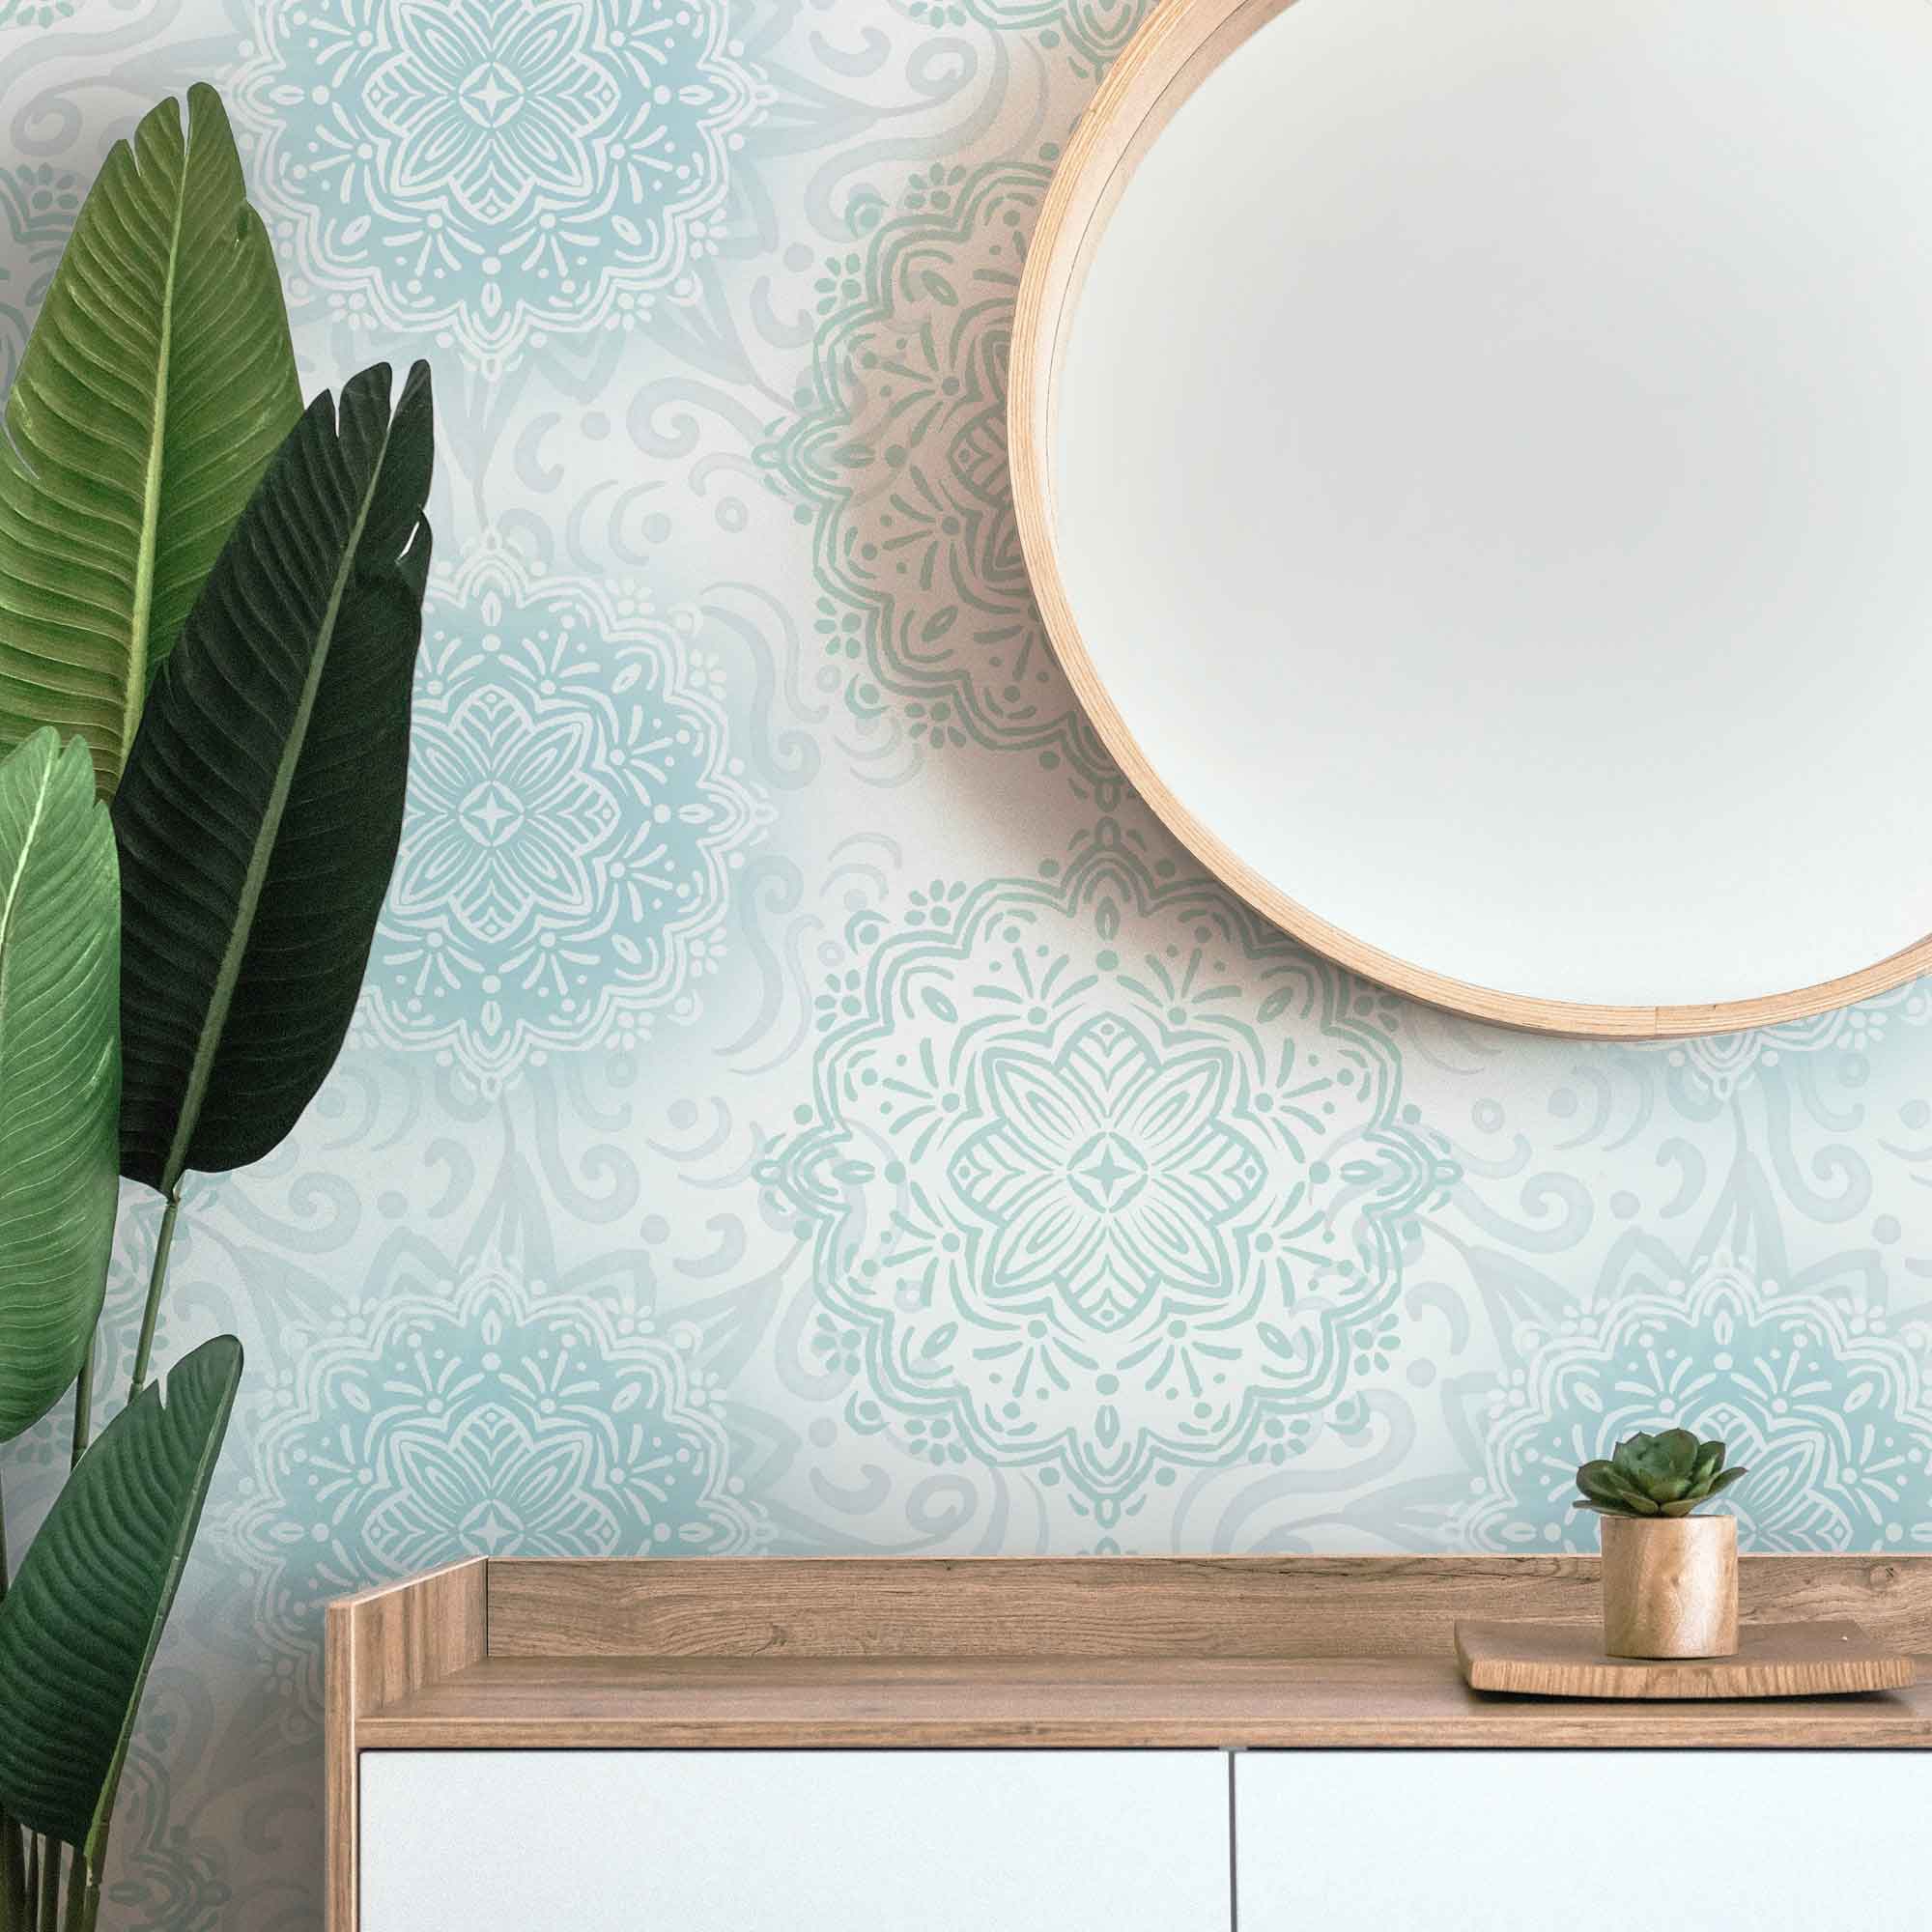 Boho Hand-drawn Mandalas in pastel Blue and Aqua Removable Peel & Stick and Pre-Pasted Wallpaper Dresser example